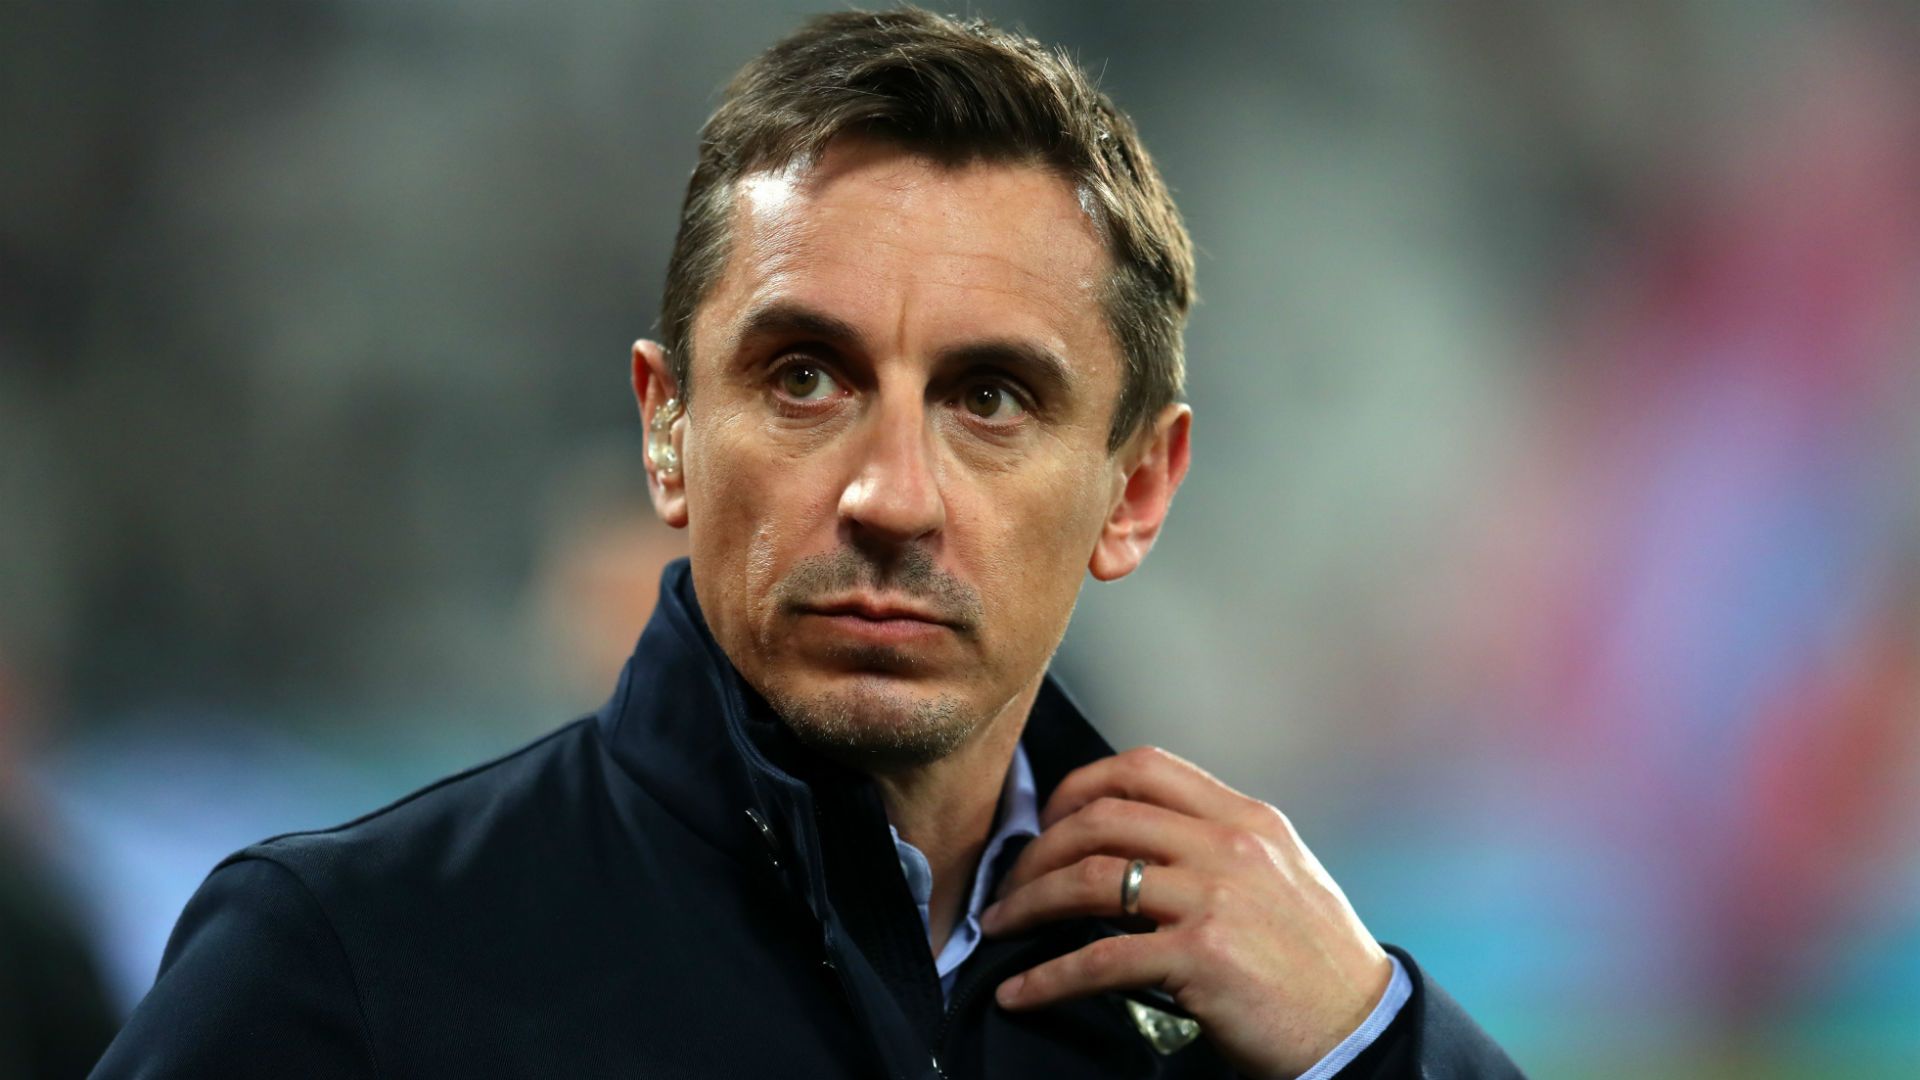 Gary Neville wants deeper action over "sickening" racist abuse